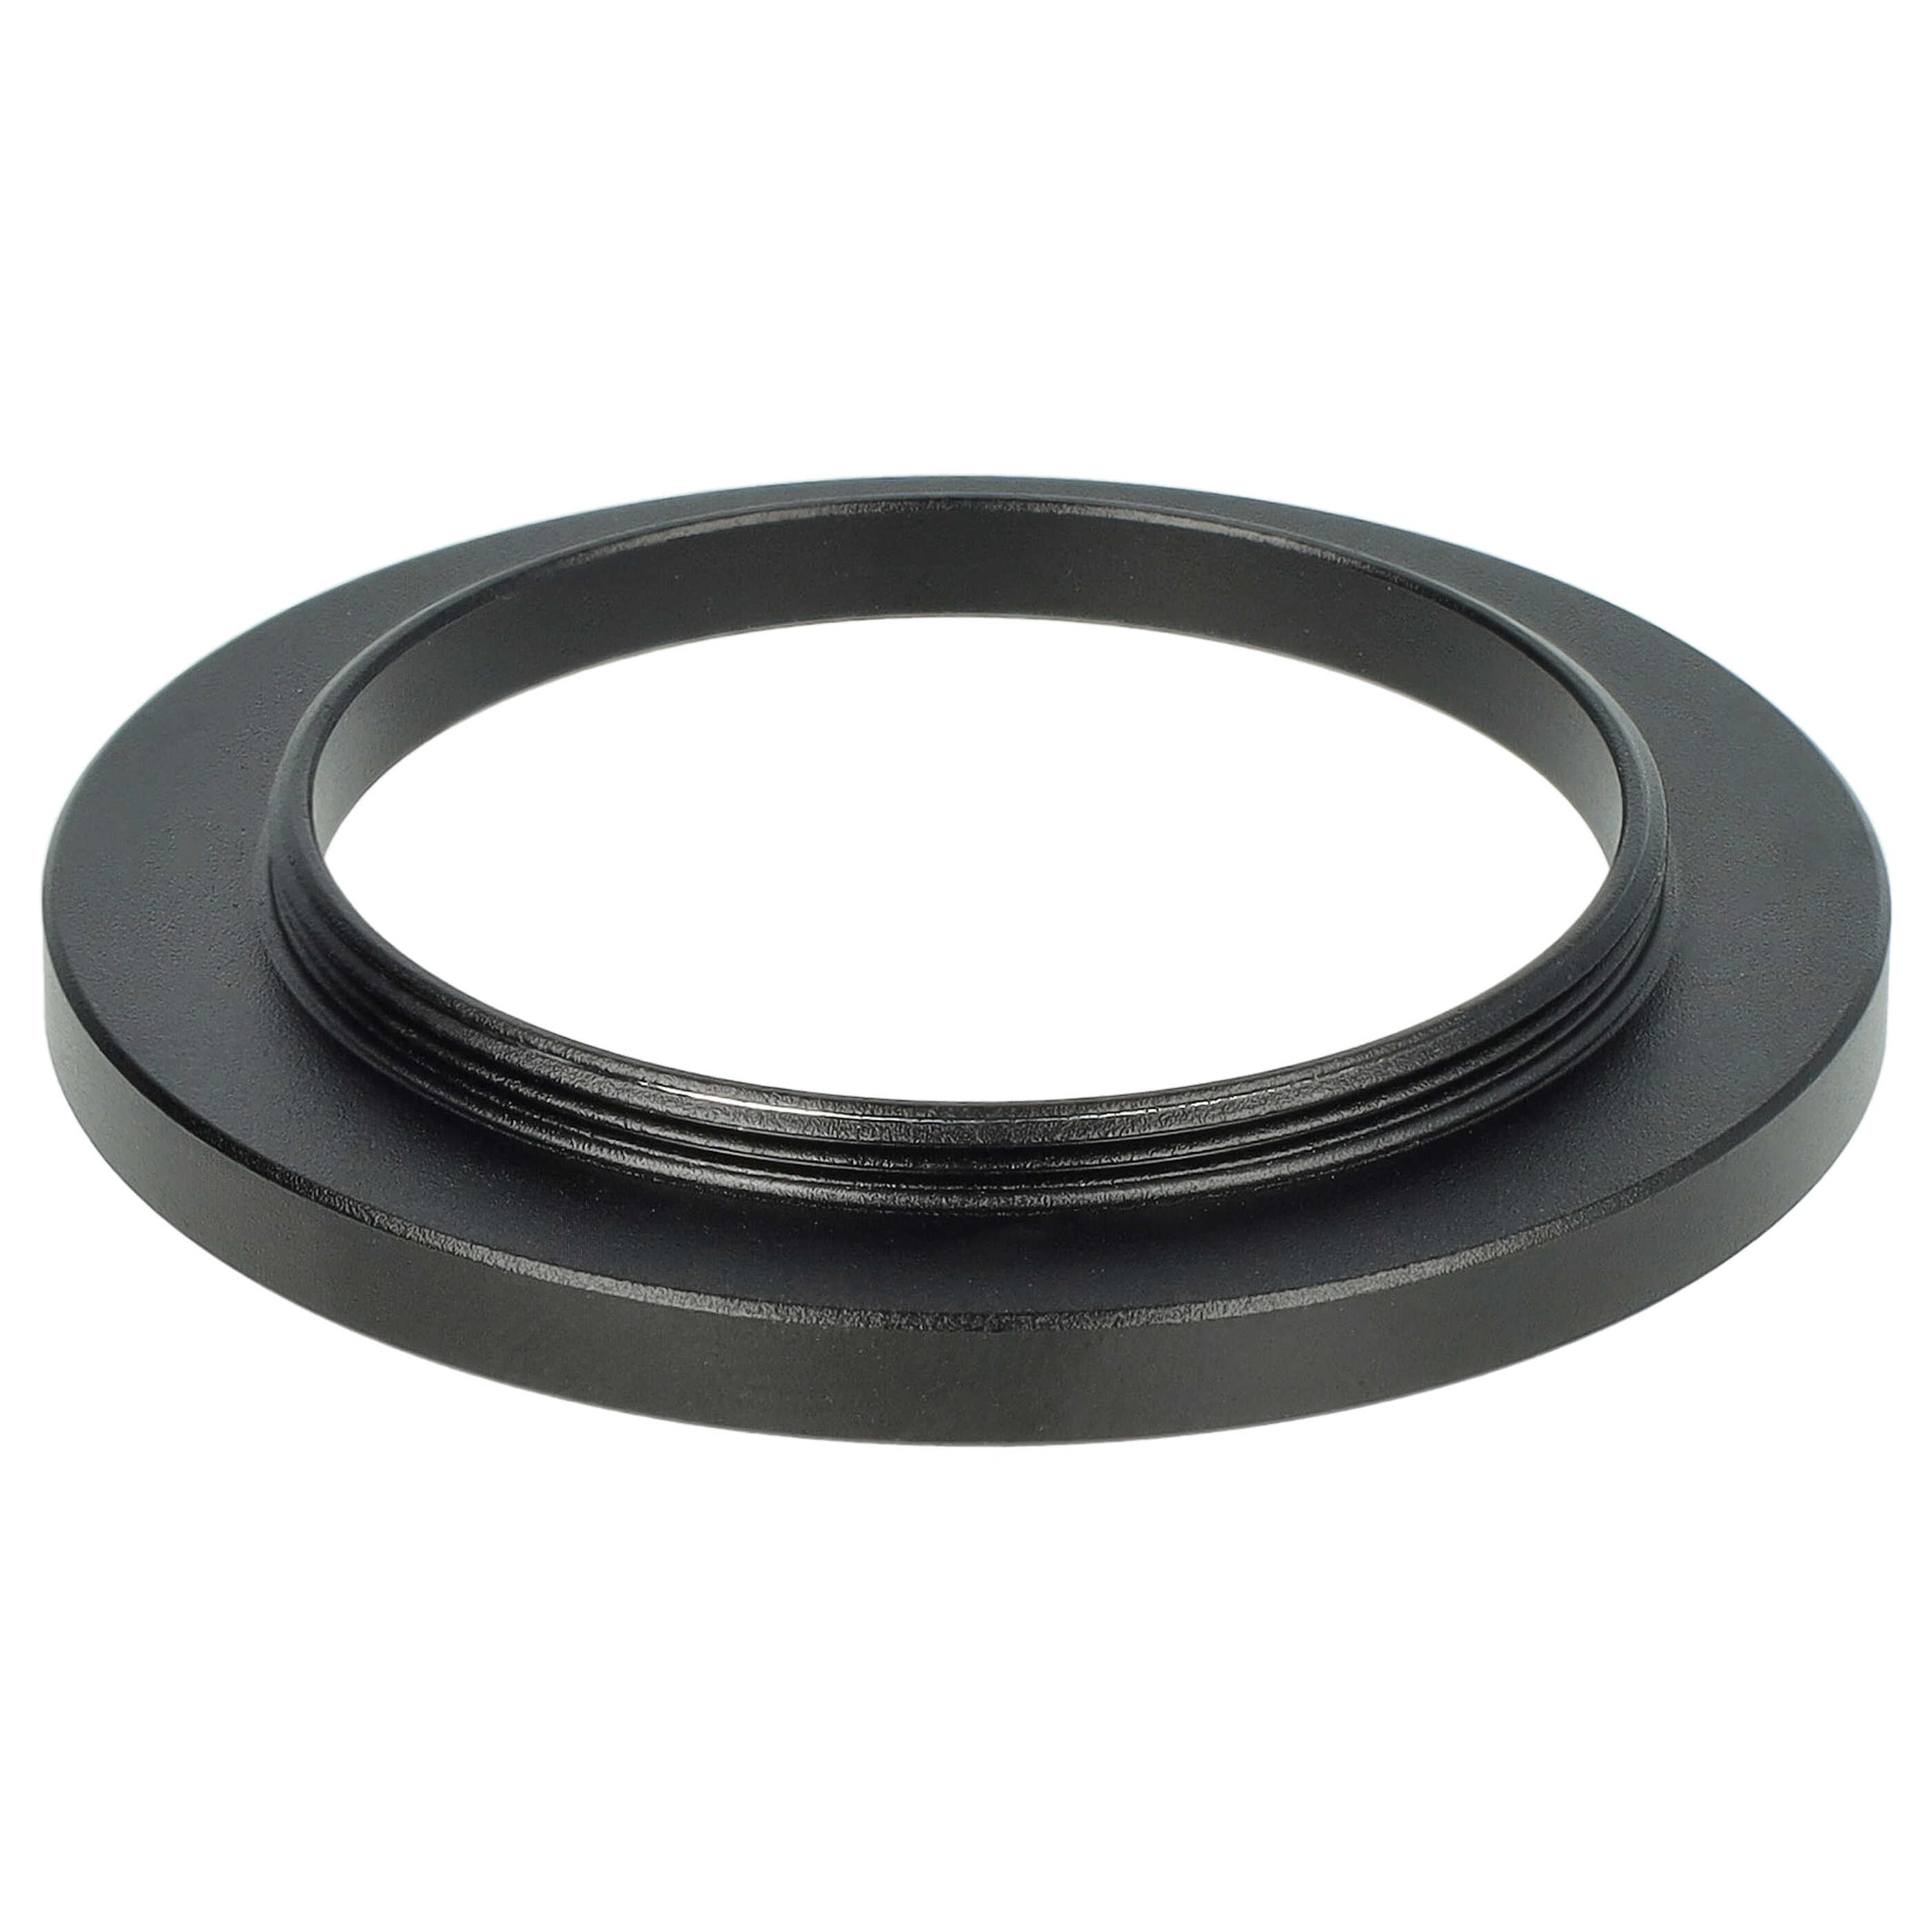 Step-Up Ring Adapter of 37 mm to 46 mmfor various Camera Lens - Filter Adapter